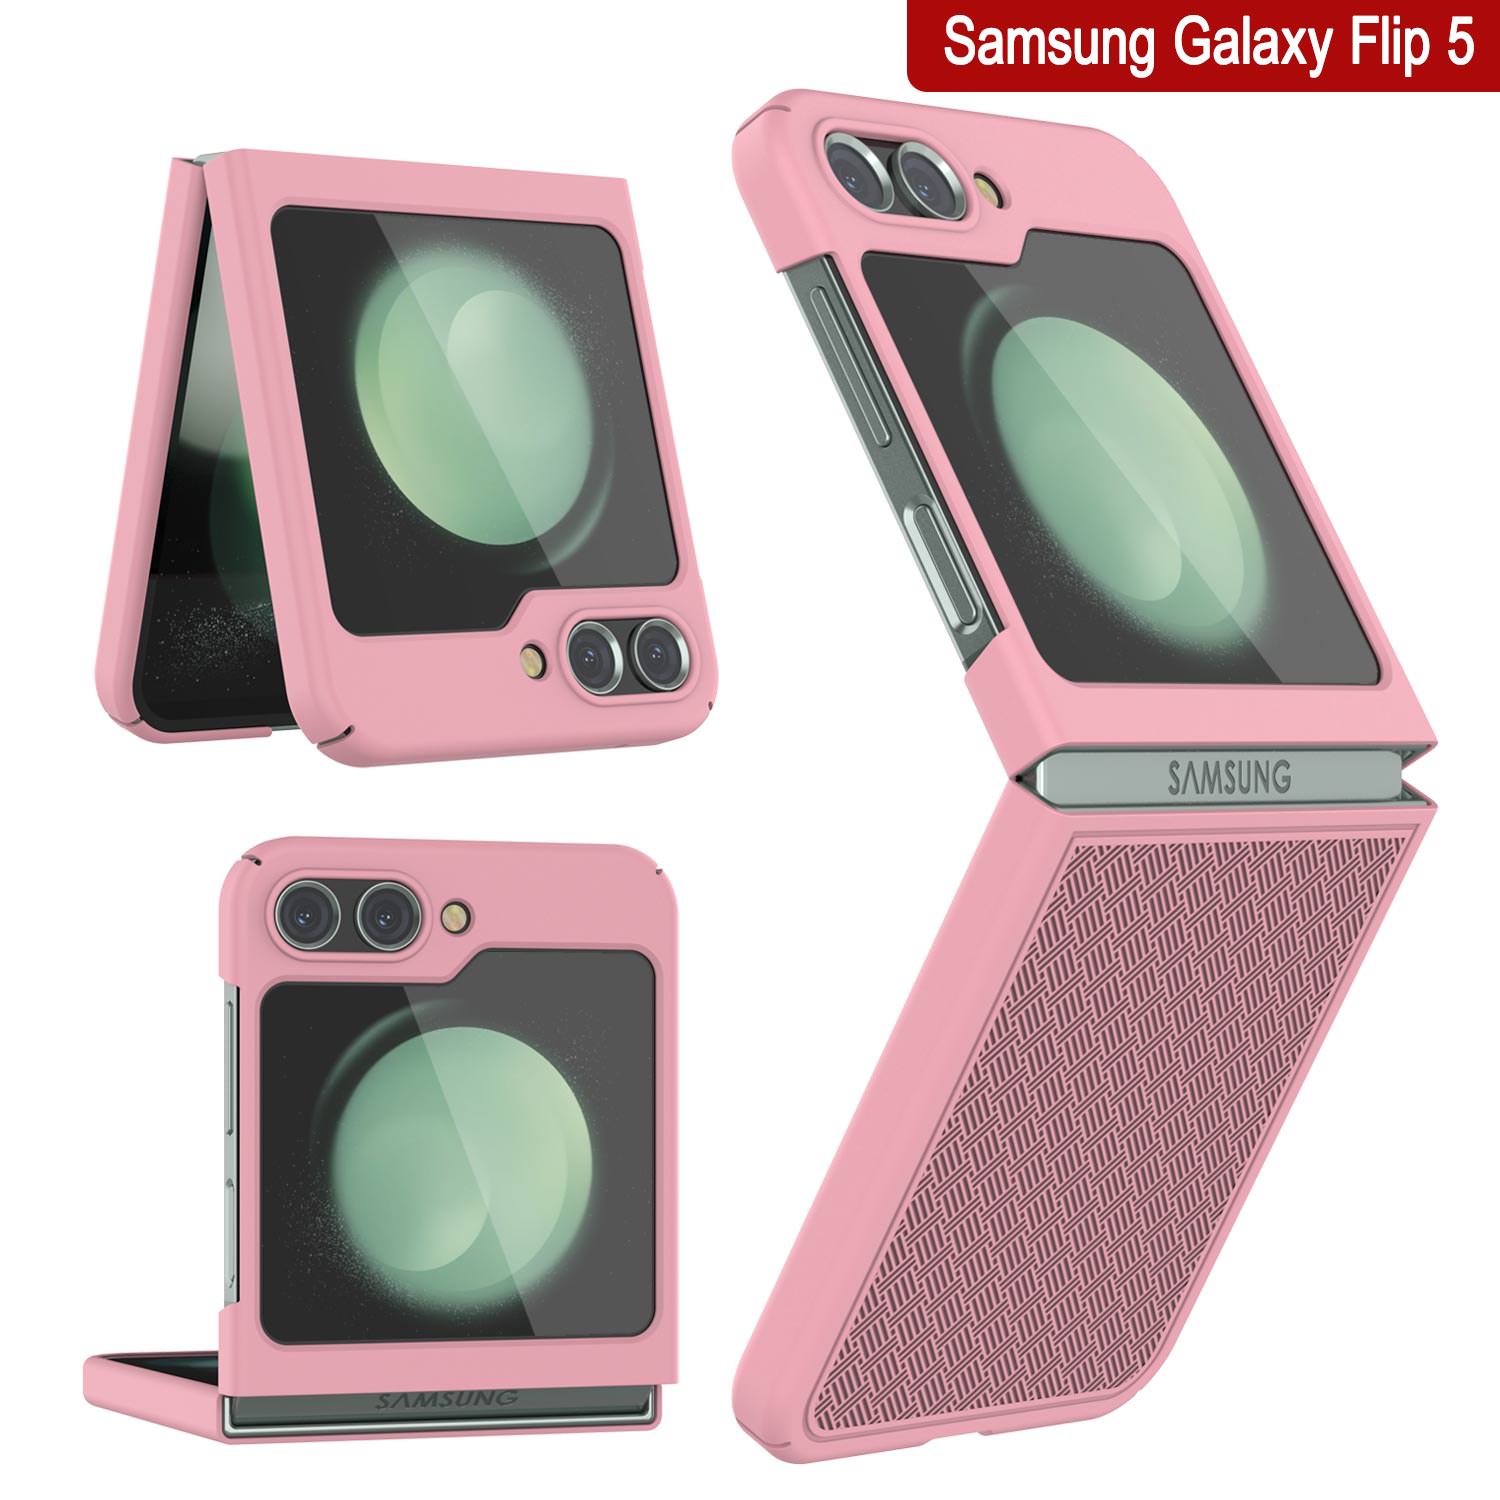 Galaxy Z Flip5 Case With Tempered Glass Screen Protector, Holster Belt Clip & Built-In Kickstand [Pink]